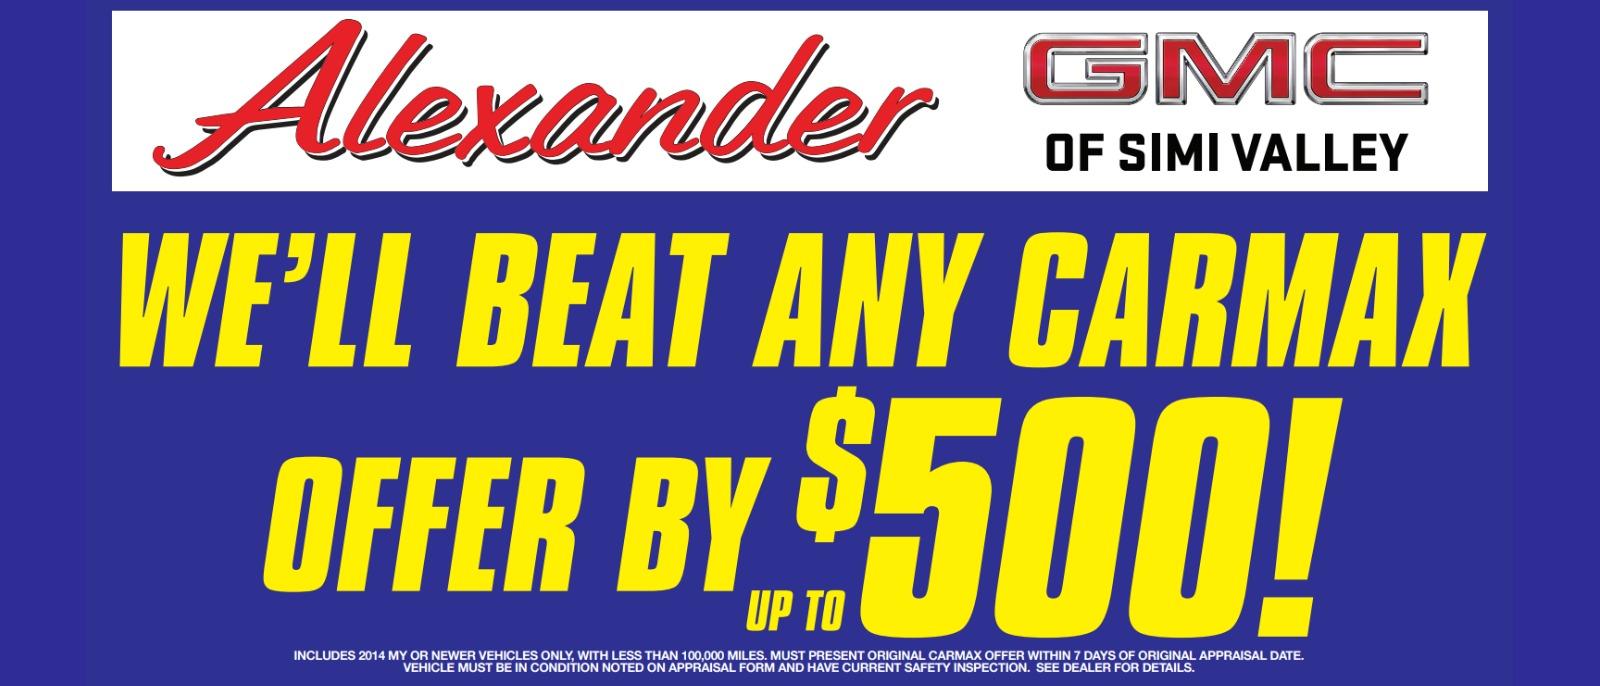 WE'LL BEAT CARMAX OFFERS BY $500. MUST PRESENT ORIGINAL CARMAX OFFER WITHIN 7 DAYS OF ORIGINAL APPRAISAL DATE. VEHICLE MUST BE IN CONDITION NOTED ON APPRAISAL FORM AND HAVE CURRENT SAFETY INSPECTION. SEE DEALER FOR DETAILS.